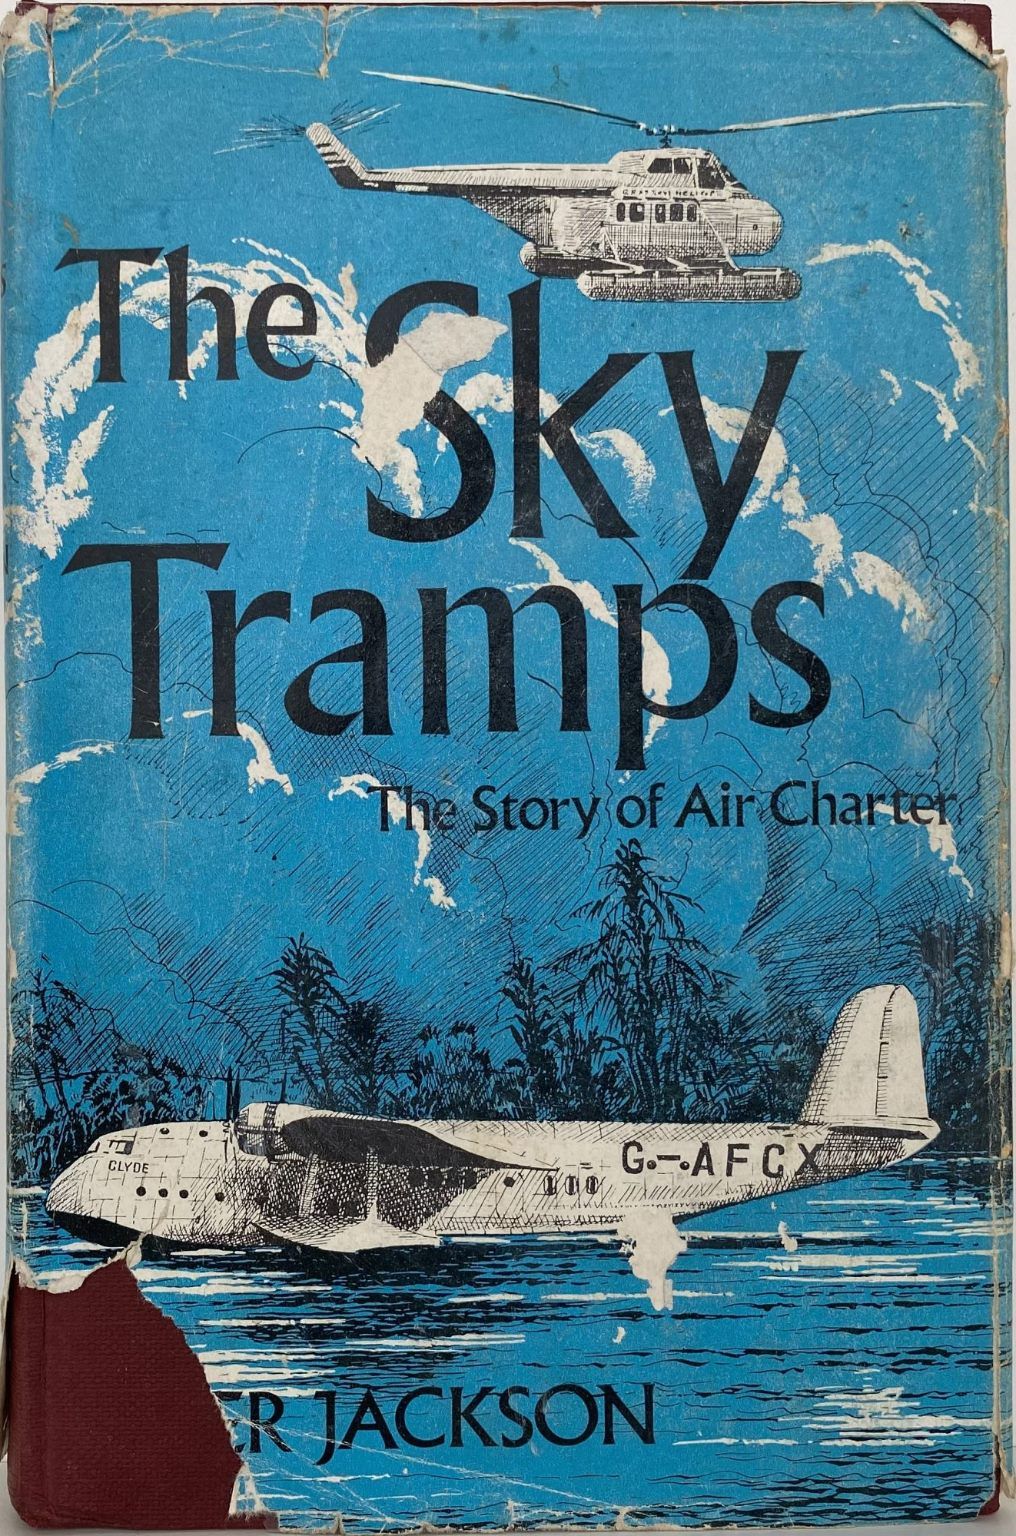 THE SKY TRAMPS: The Story of Air Charter